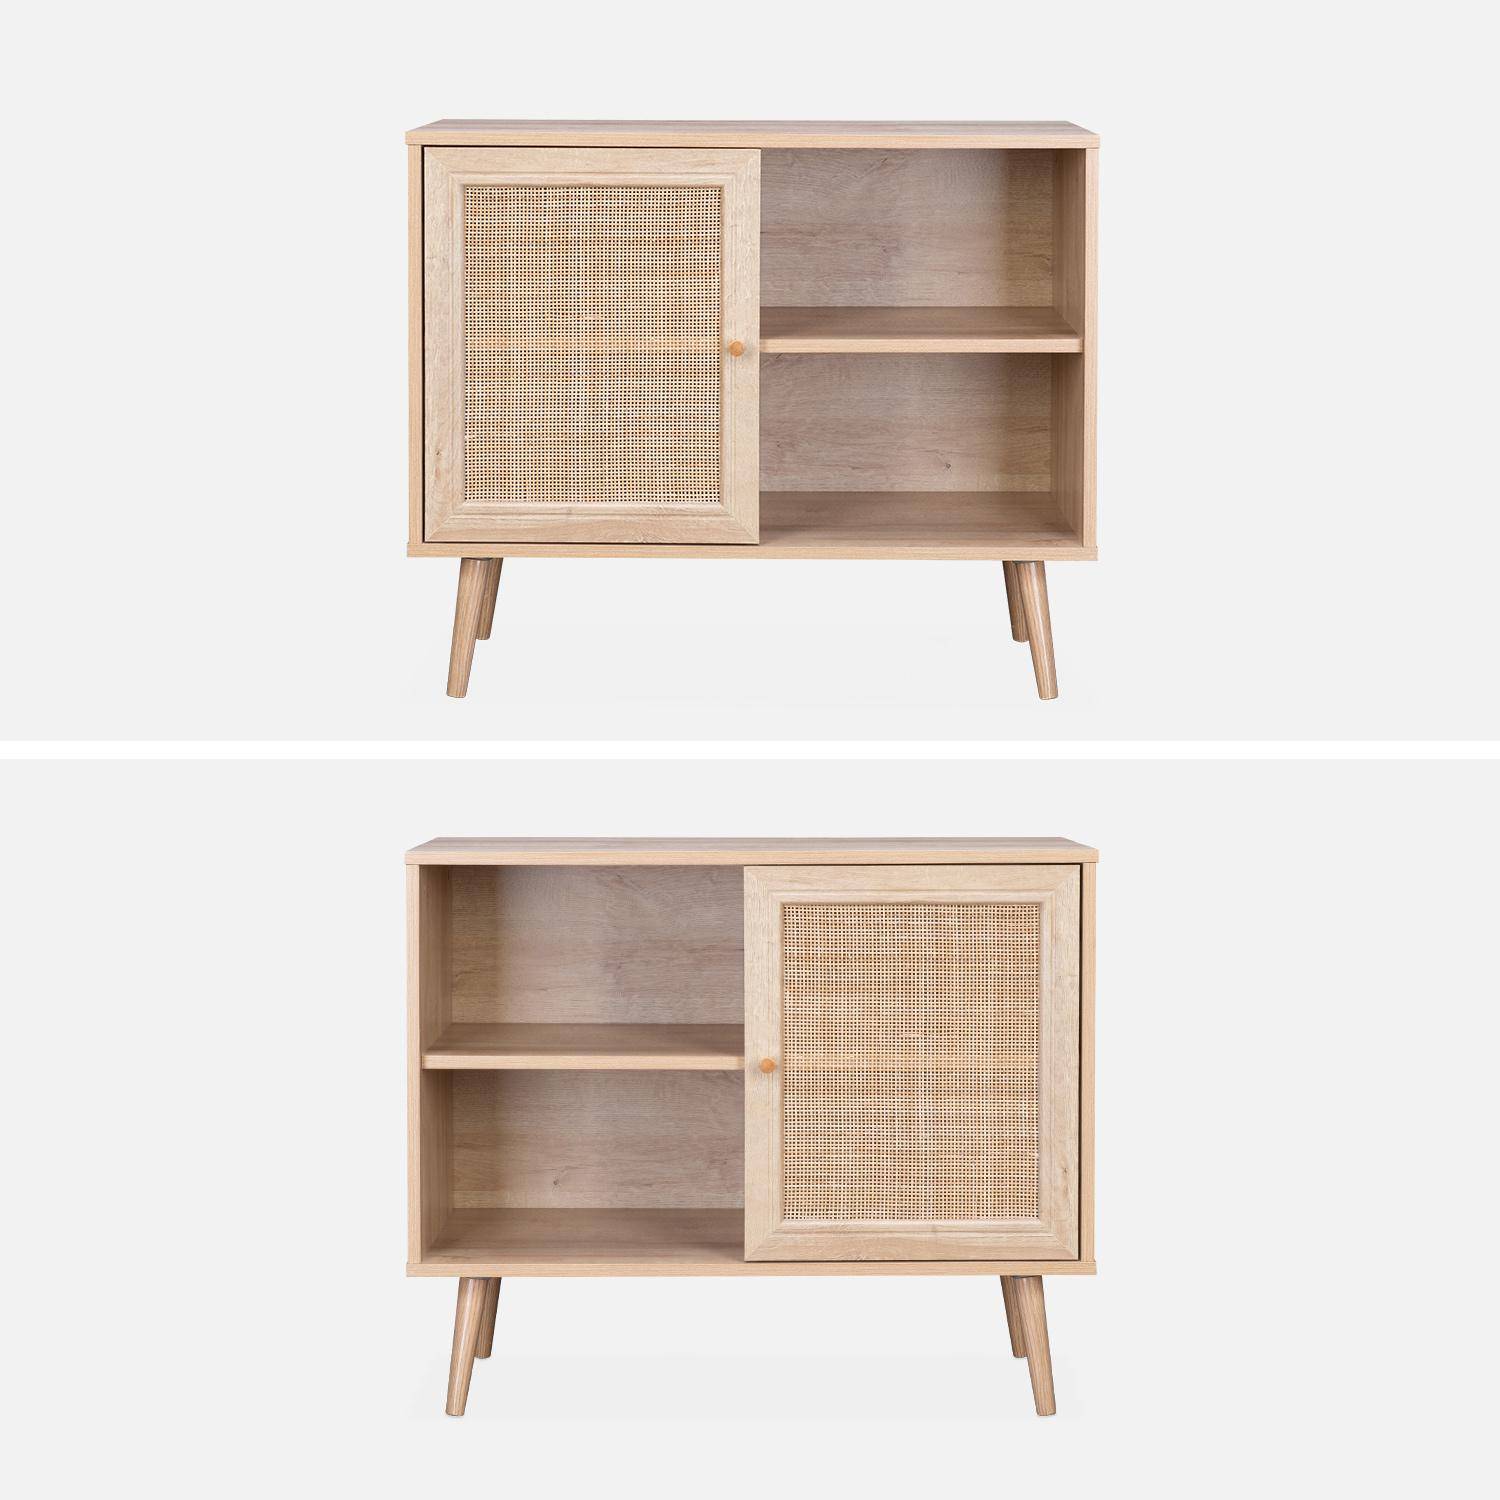 Wooden and cane rattan detail storage cabinet with 2 shelves, 1 cupboard, Scandi-style legs, 80x39x65.8cm - Boheme - Natural wood colour,sweeek,Photo4